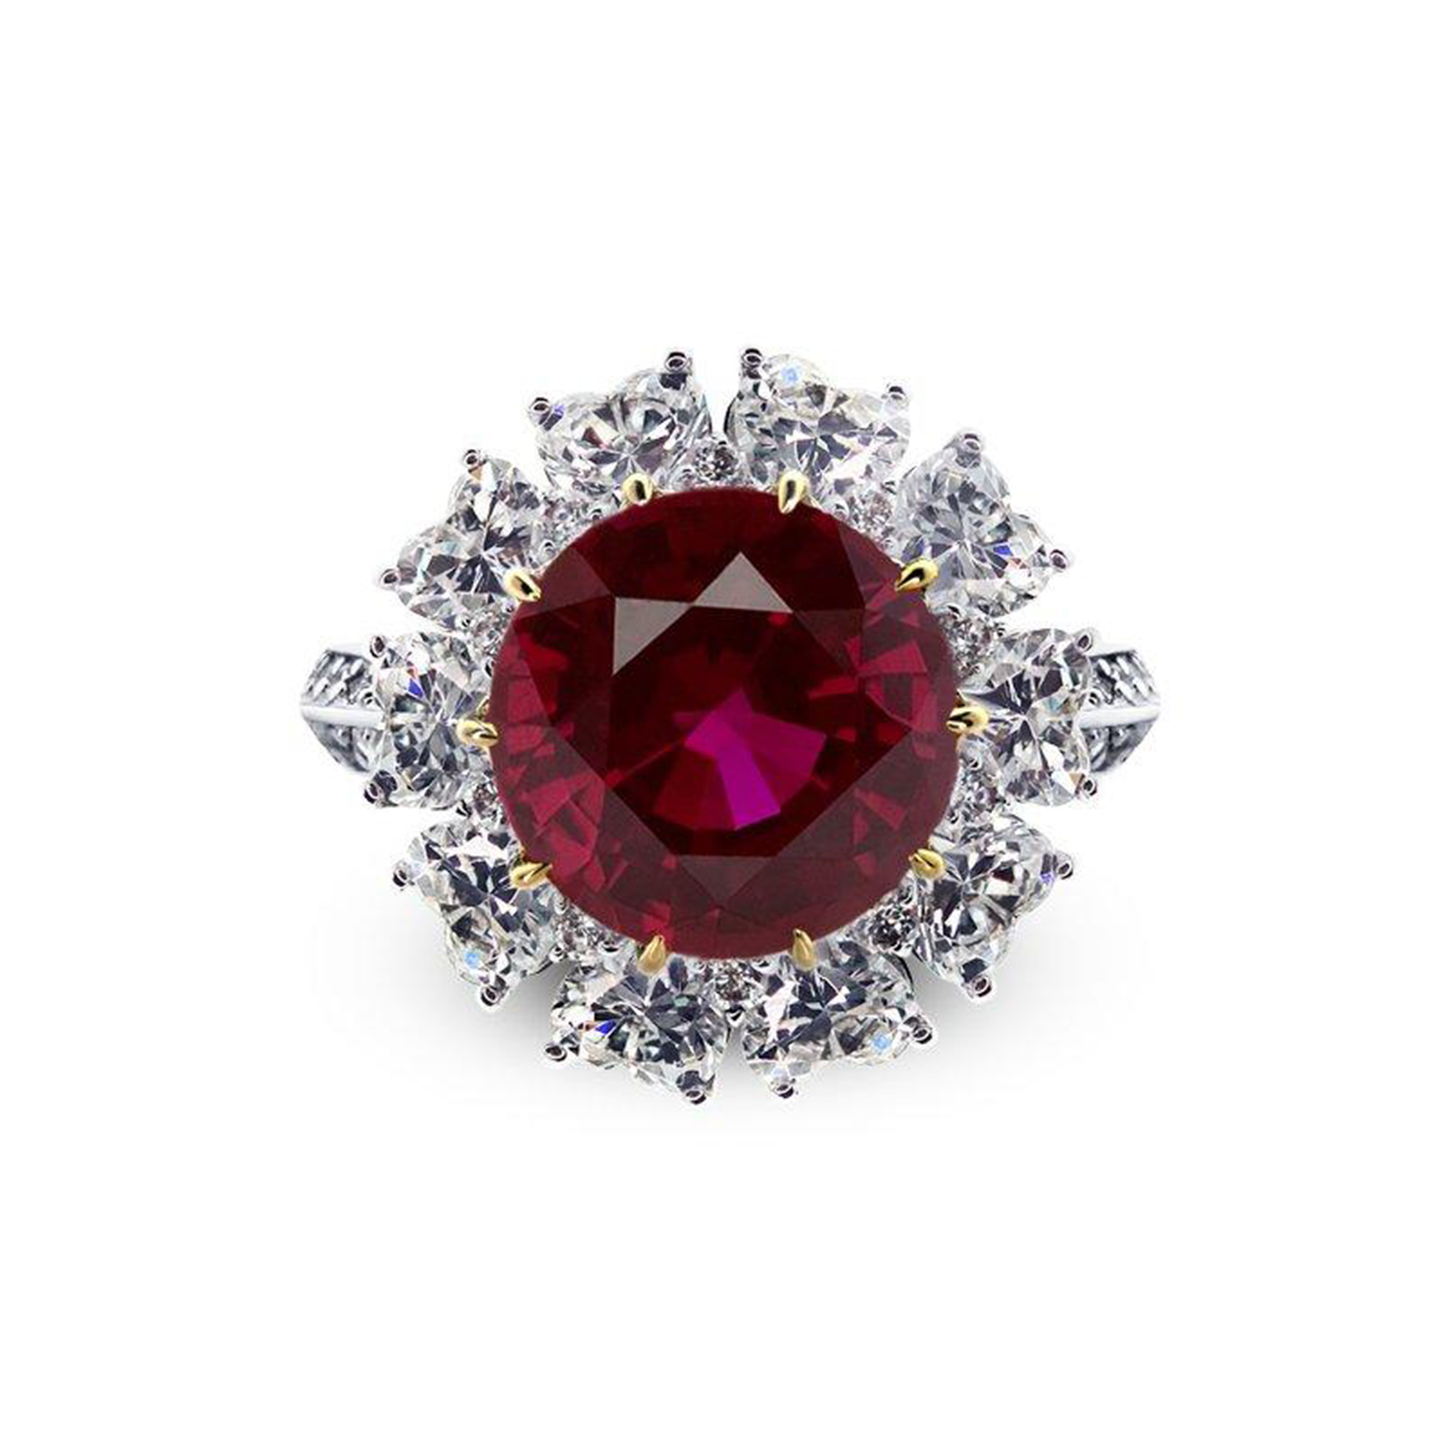 Carat  'Rosemond' Ruby simulant and white stone cocktail ring - 3.0ct. - CR925W-RUBY-7